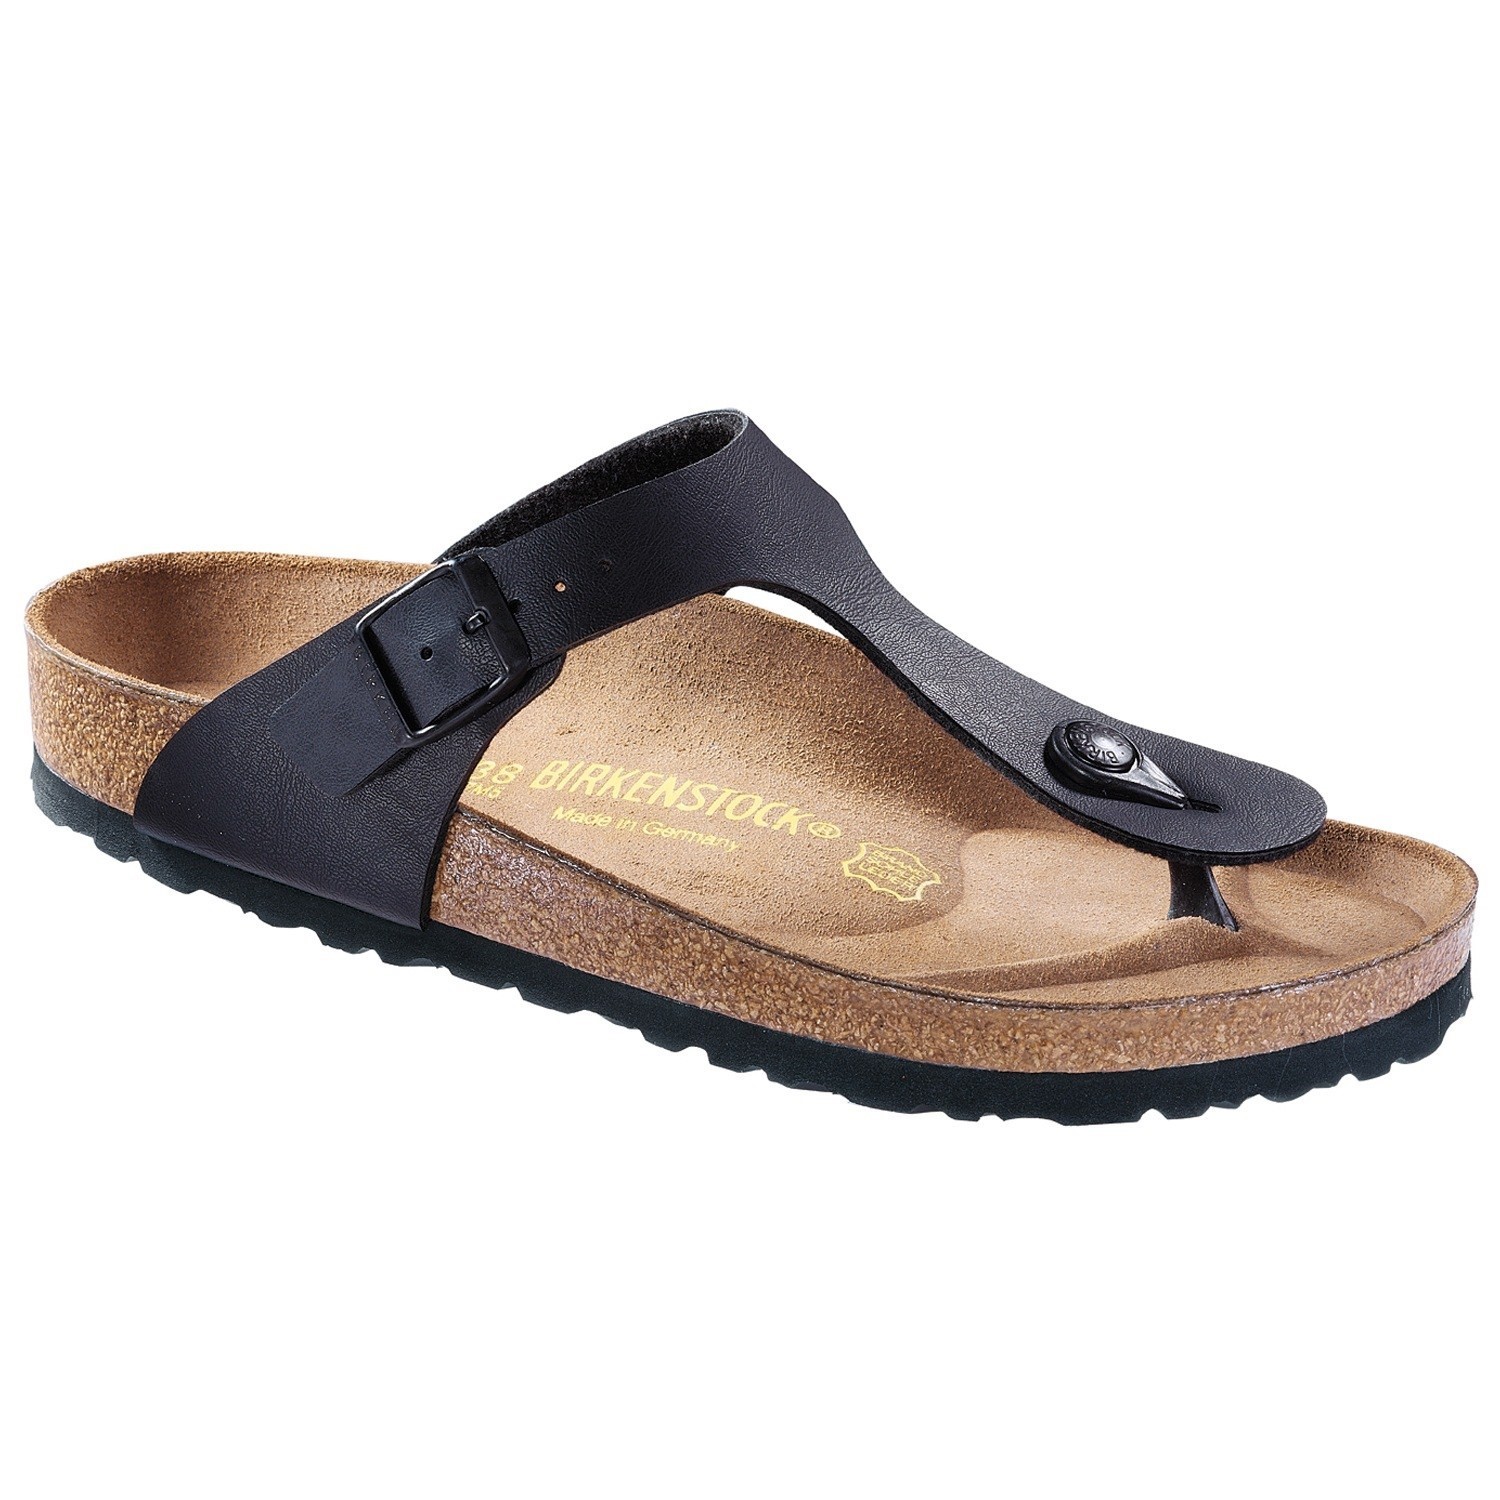 Birkenstock Gizeh Habana - Everyday shoes - Shoes - Timarco